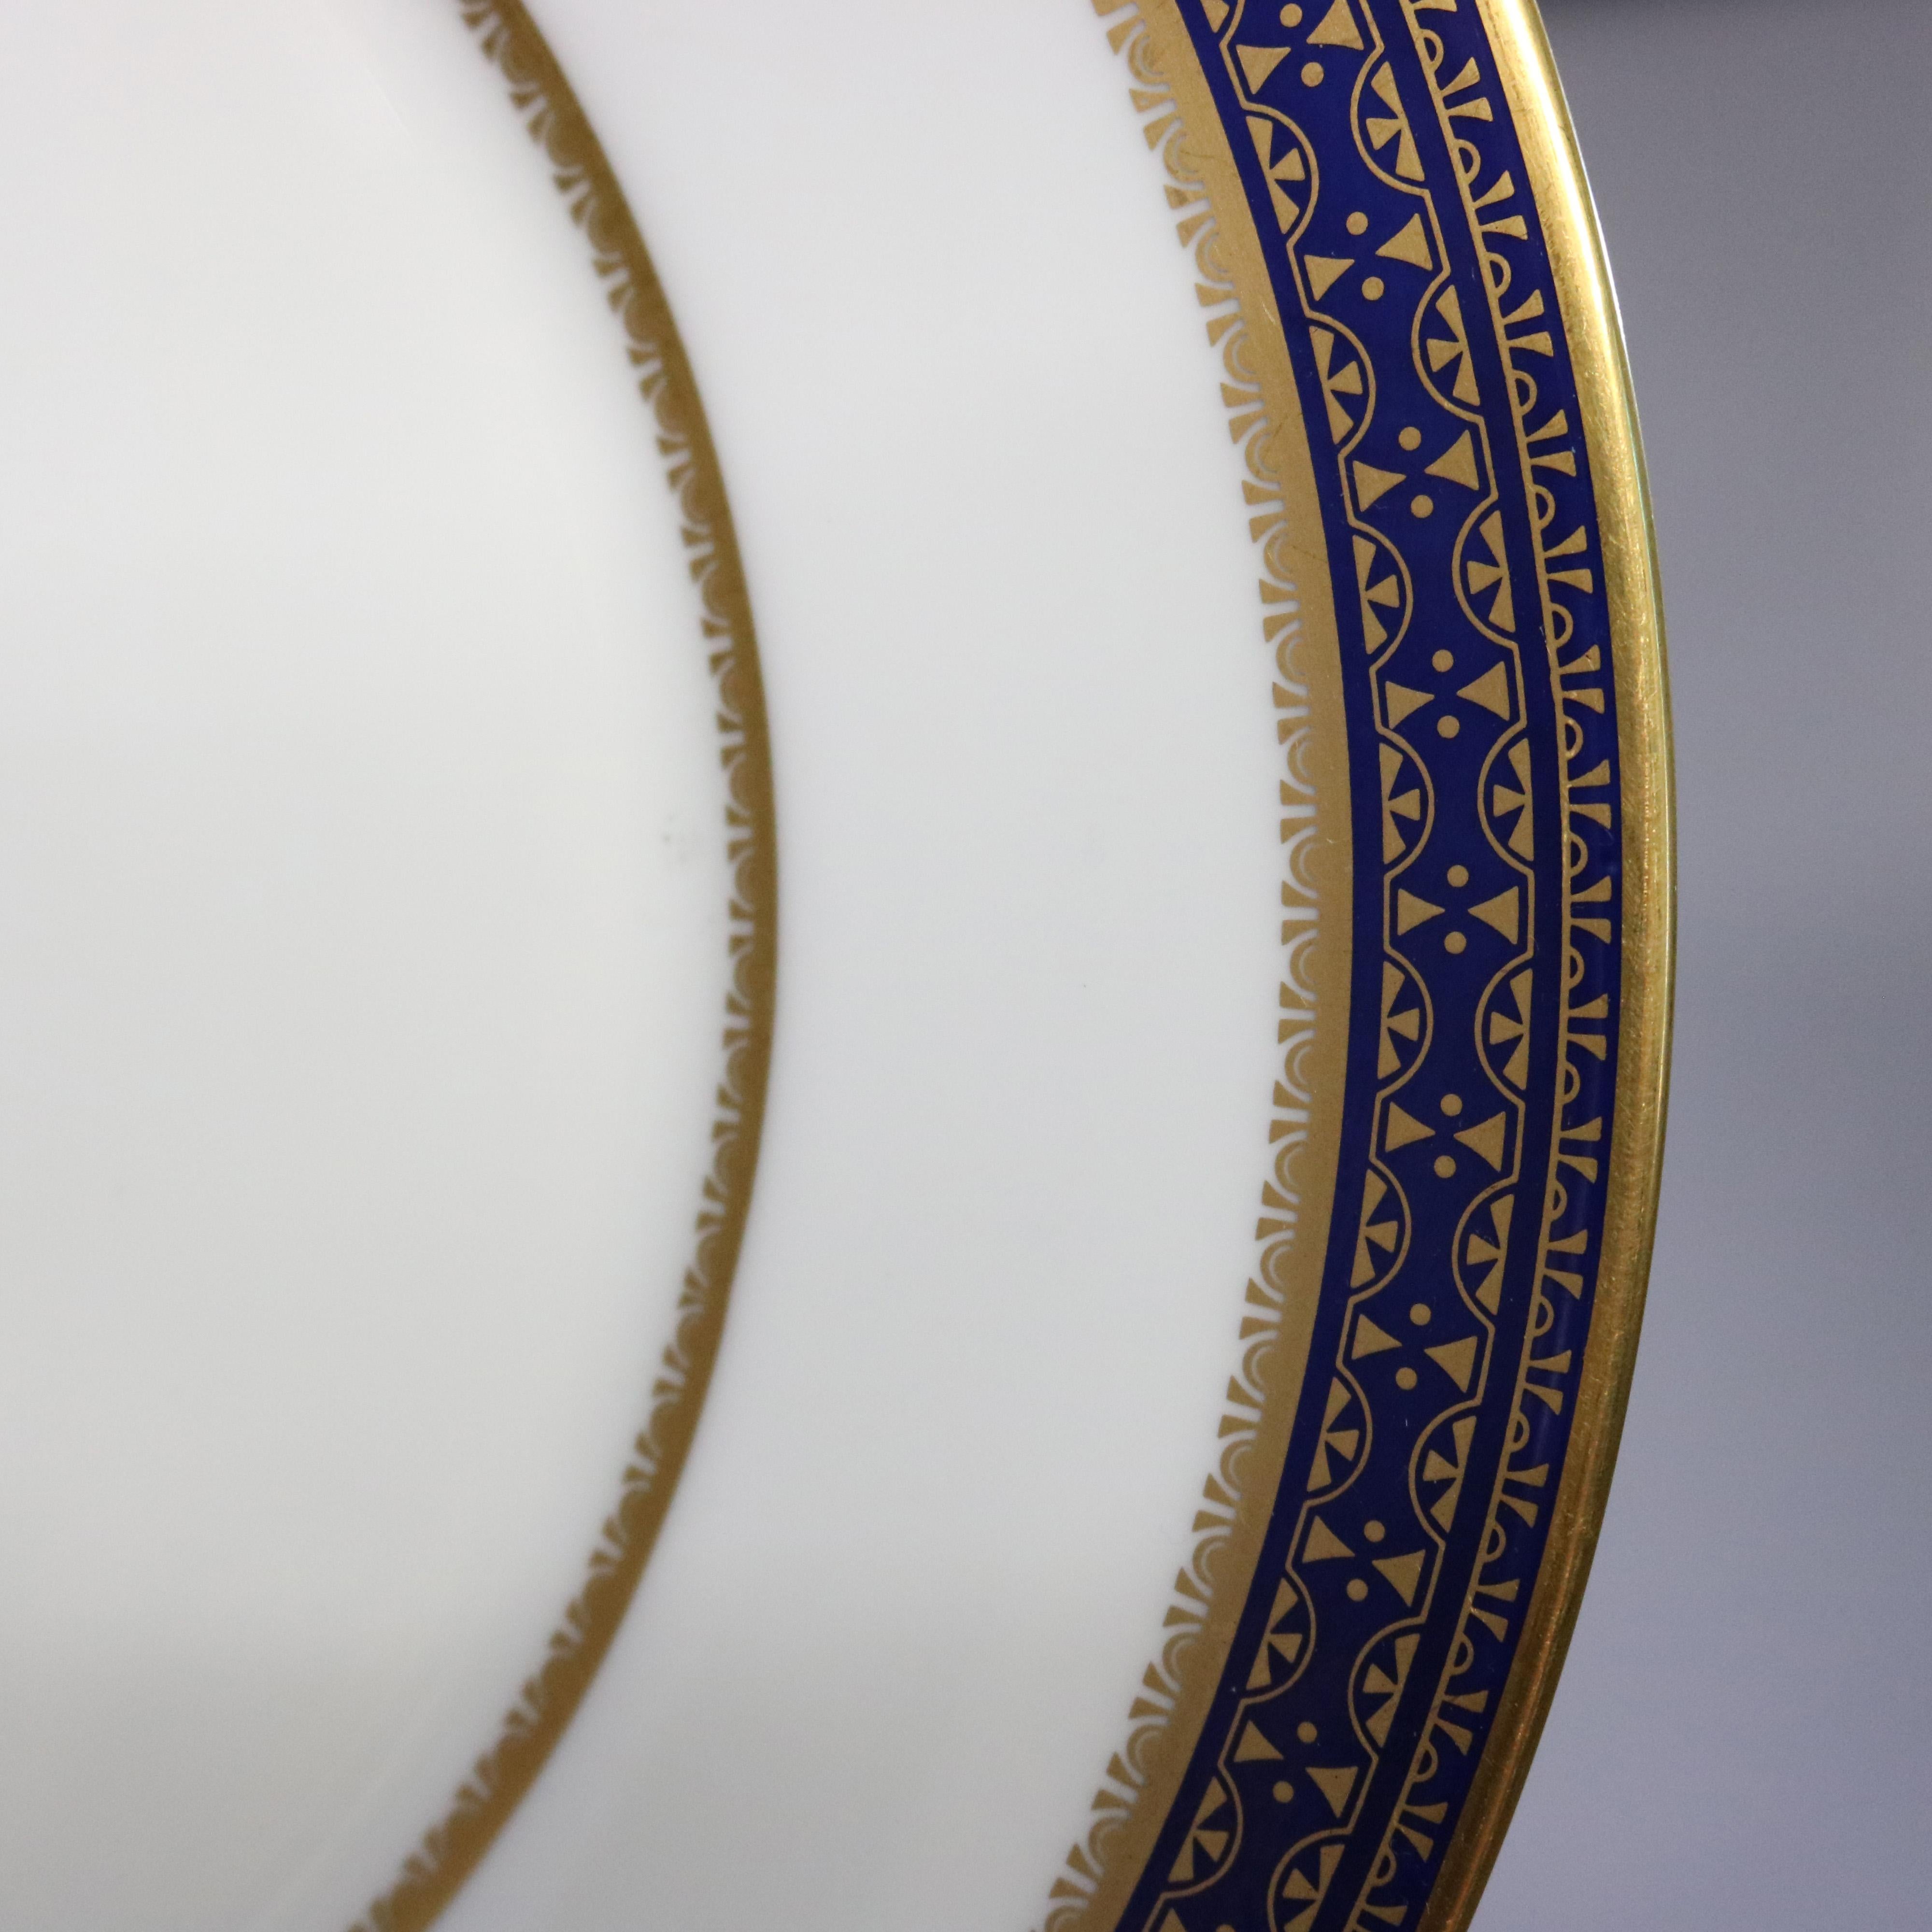 A set of 11 English Oxford bone China dinner plates offer cobalt blue bordering with gold gilt highlights, en verso maker mark as photographed, 20th century

Measures- 0.88